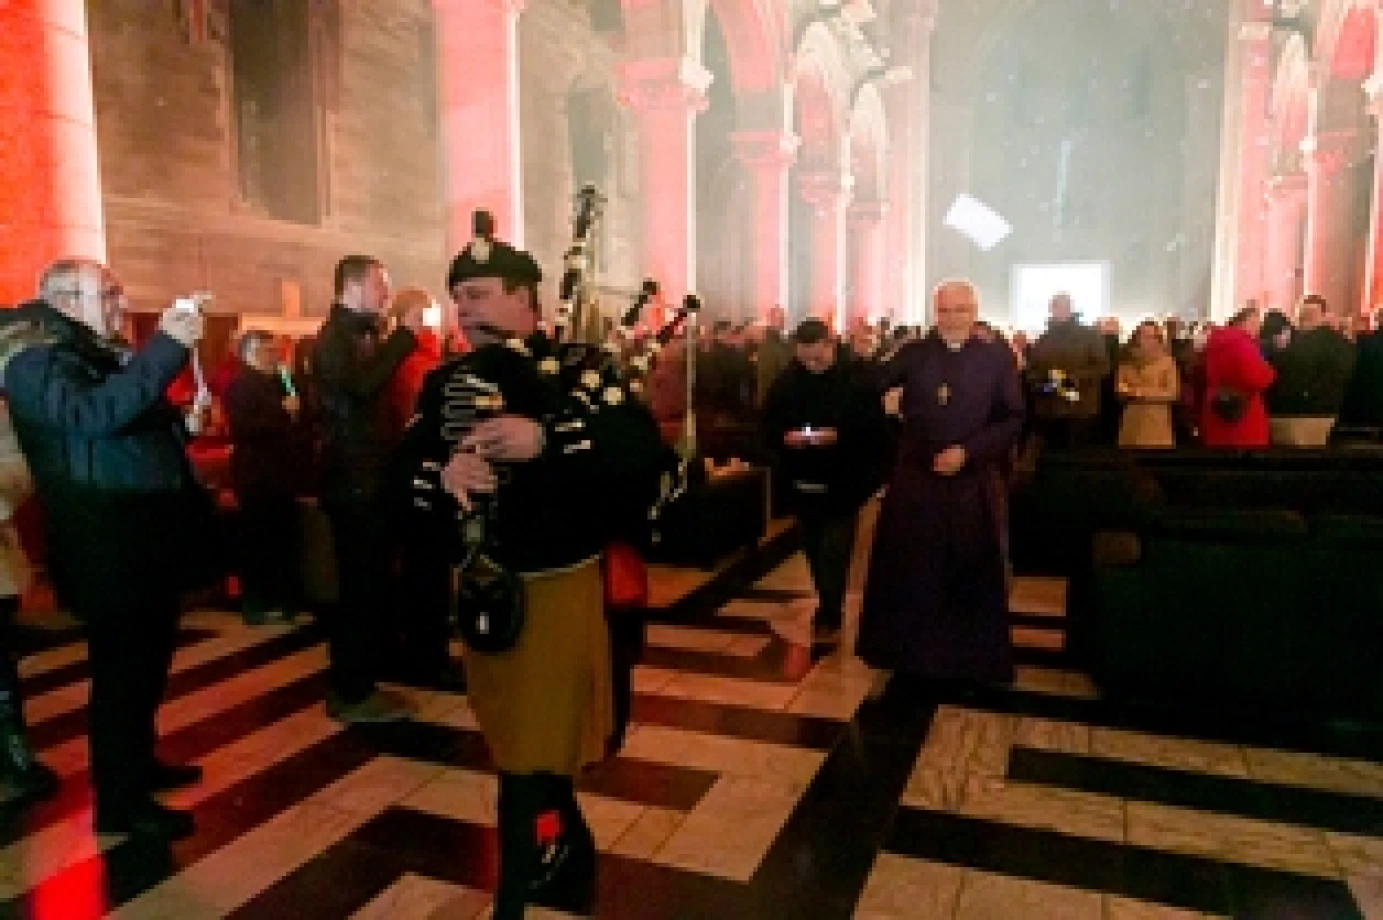 Cathedral lights up as Bishop Harold leads the diocese into a Year of Mission